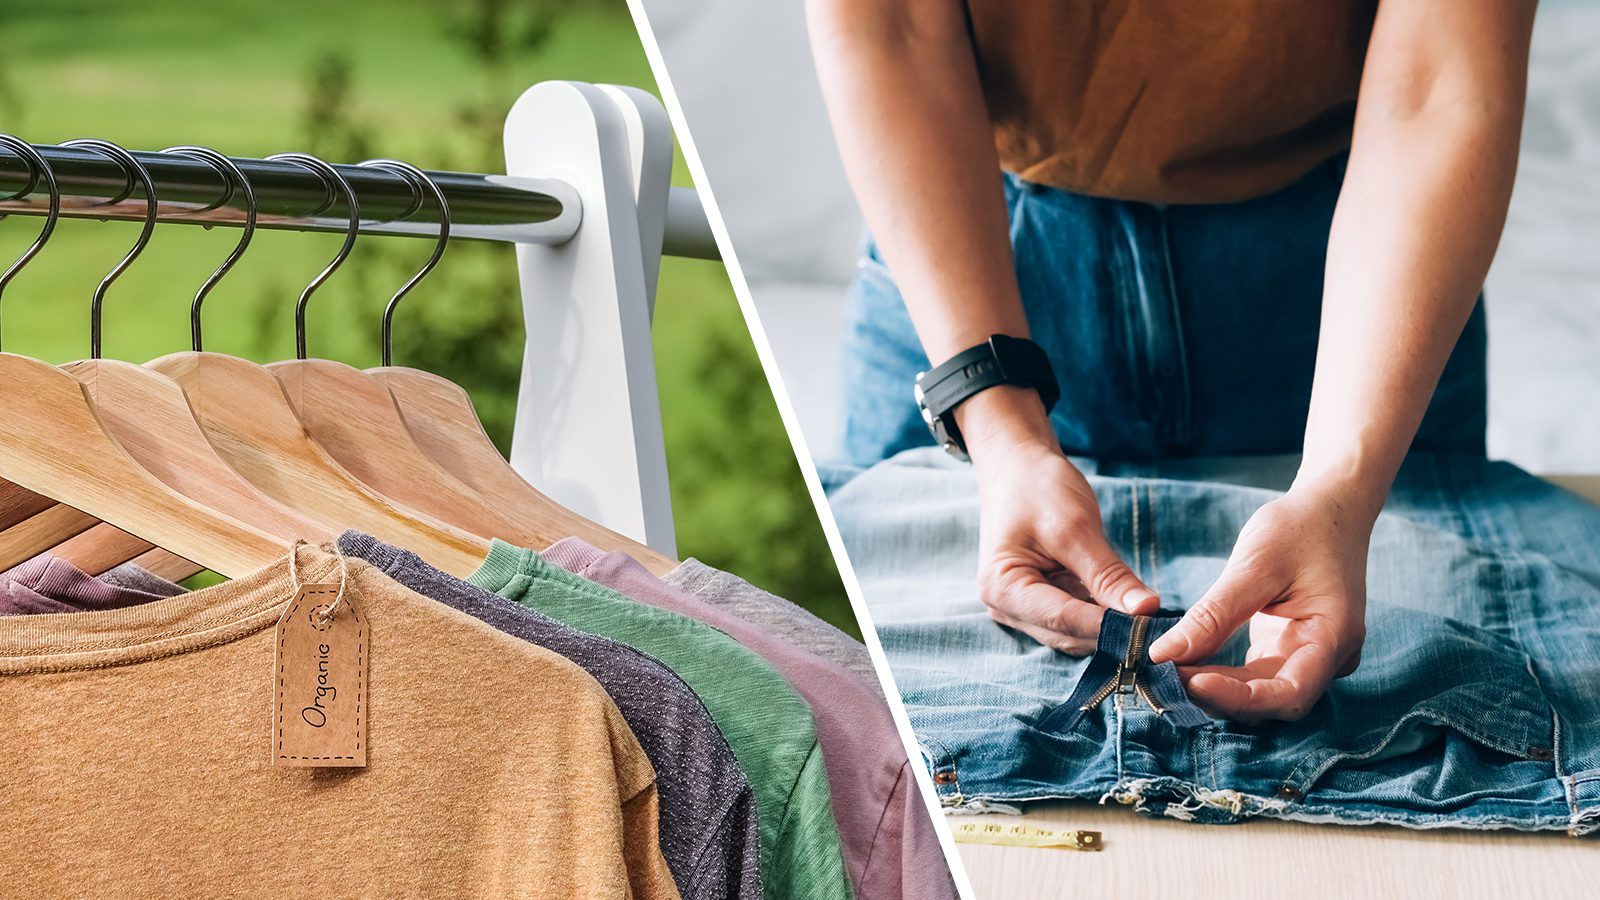 Scientists Explain 4 Sustainability Steps for Fashion